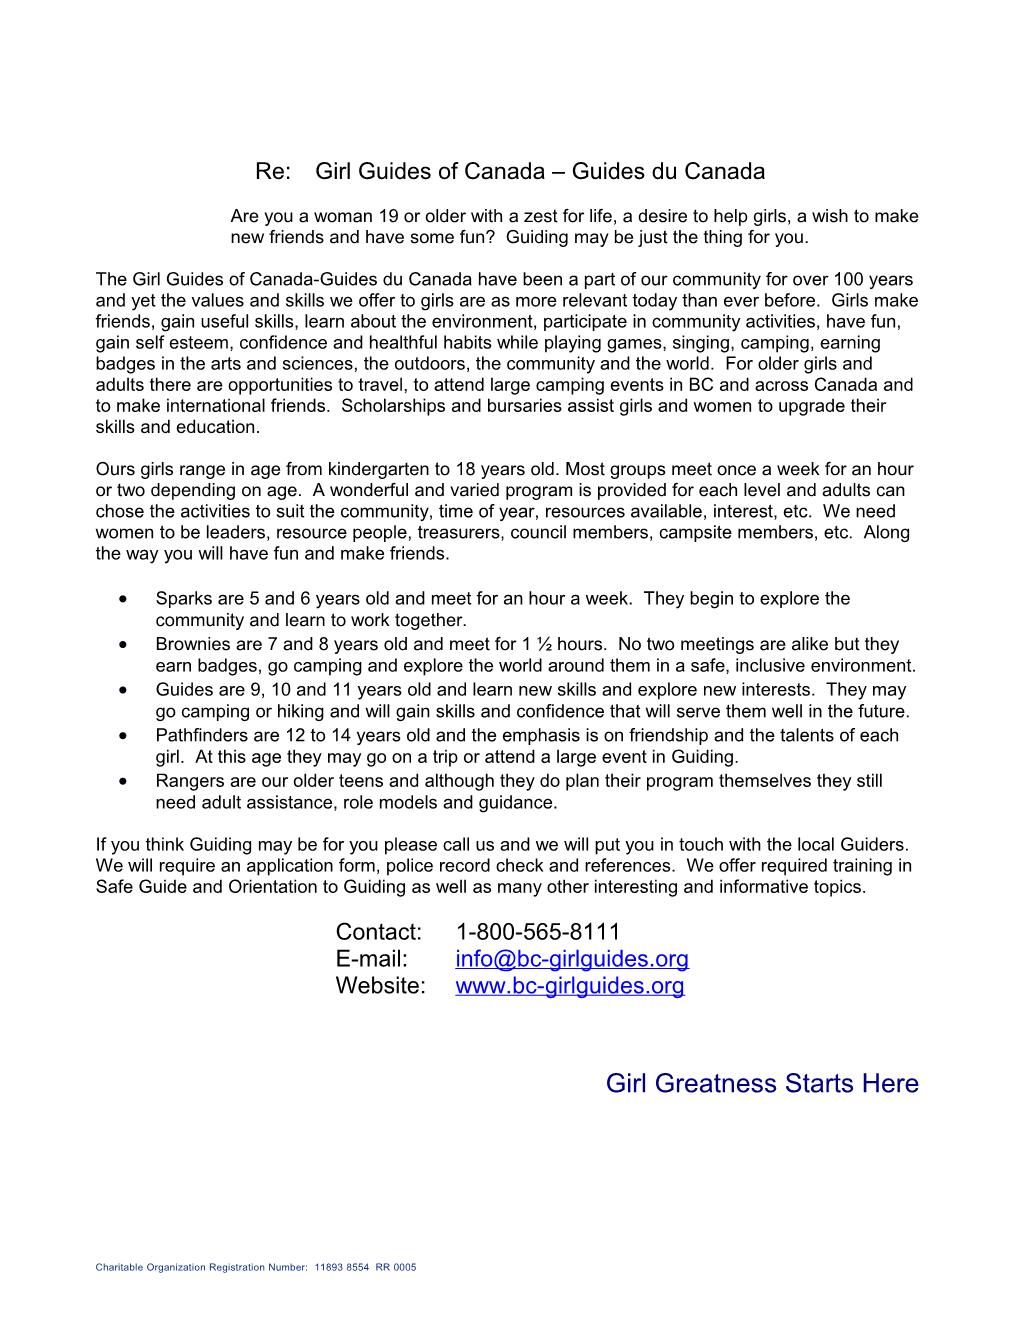 Re:Girl Guides of Canada Guides Du Canada